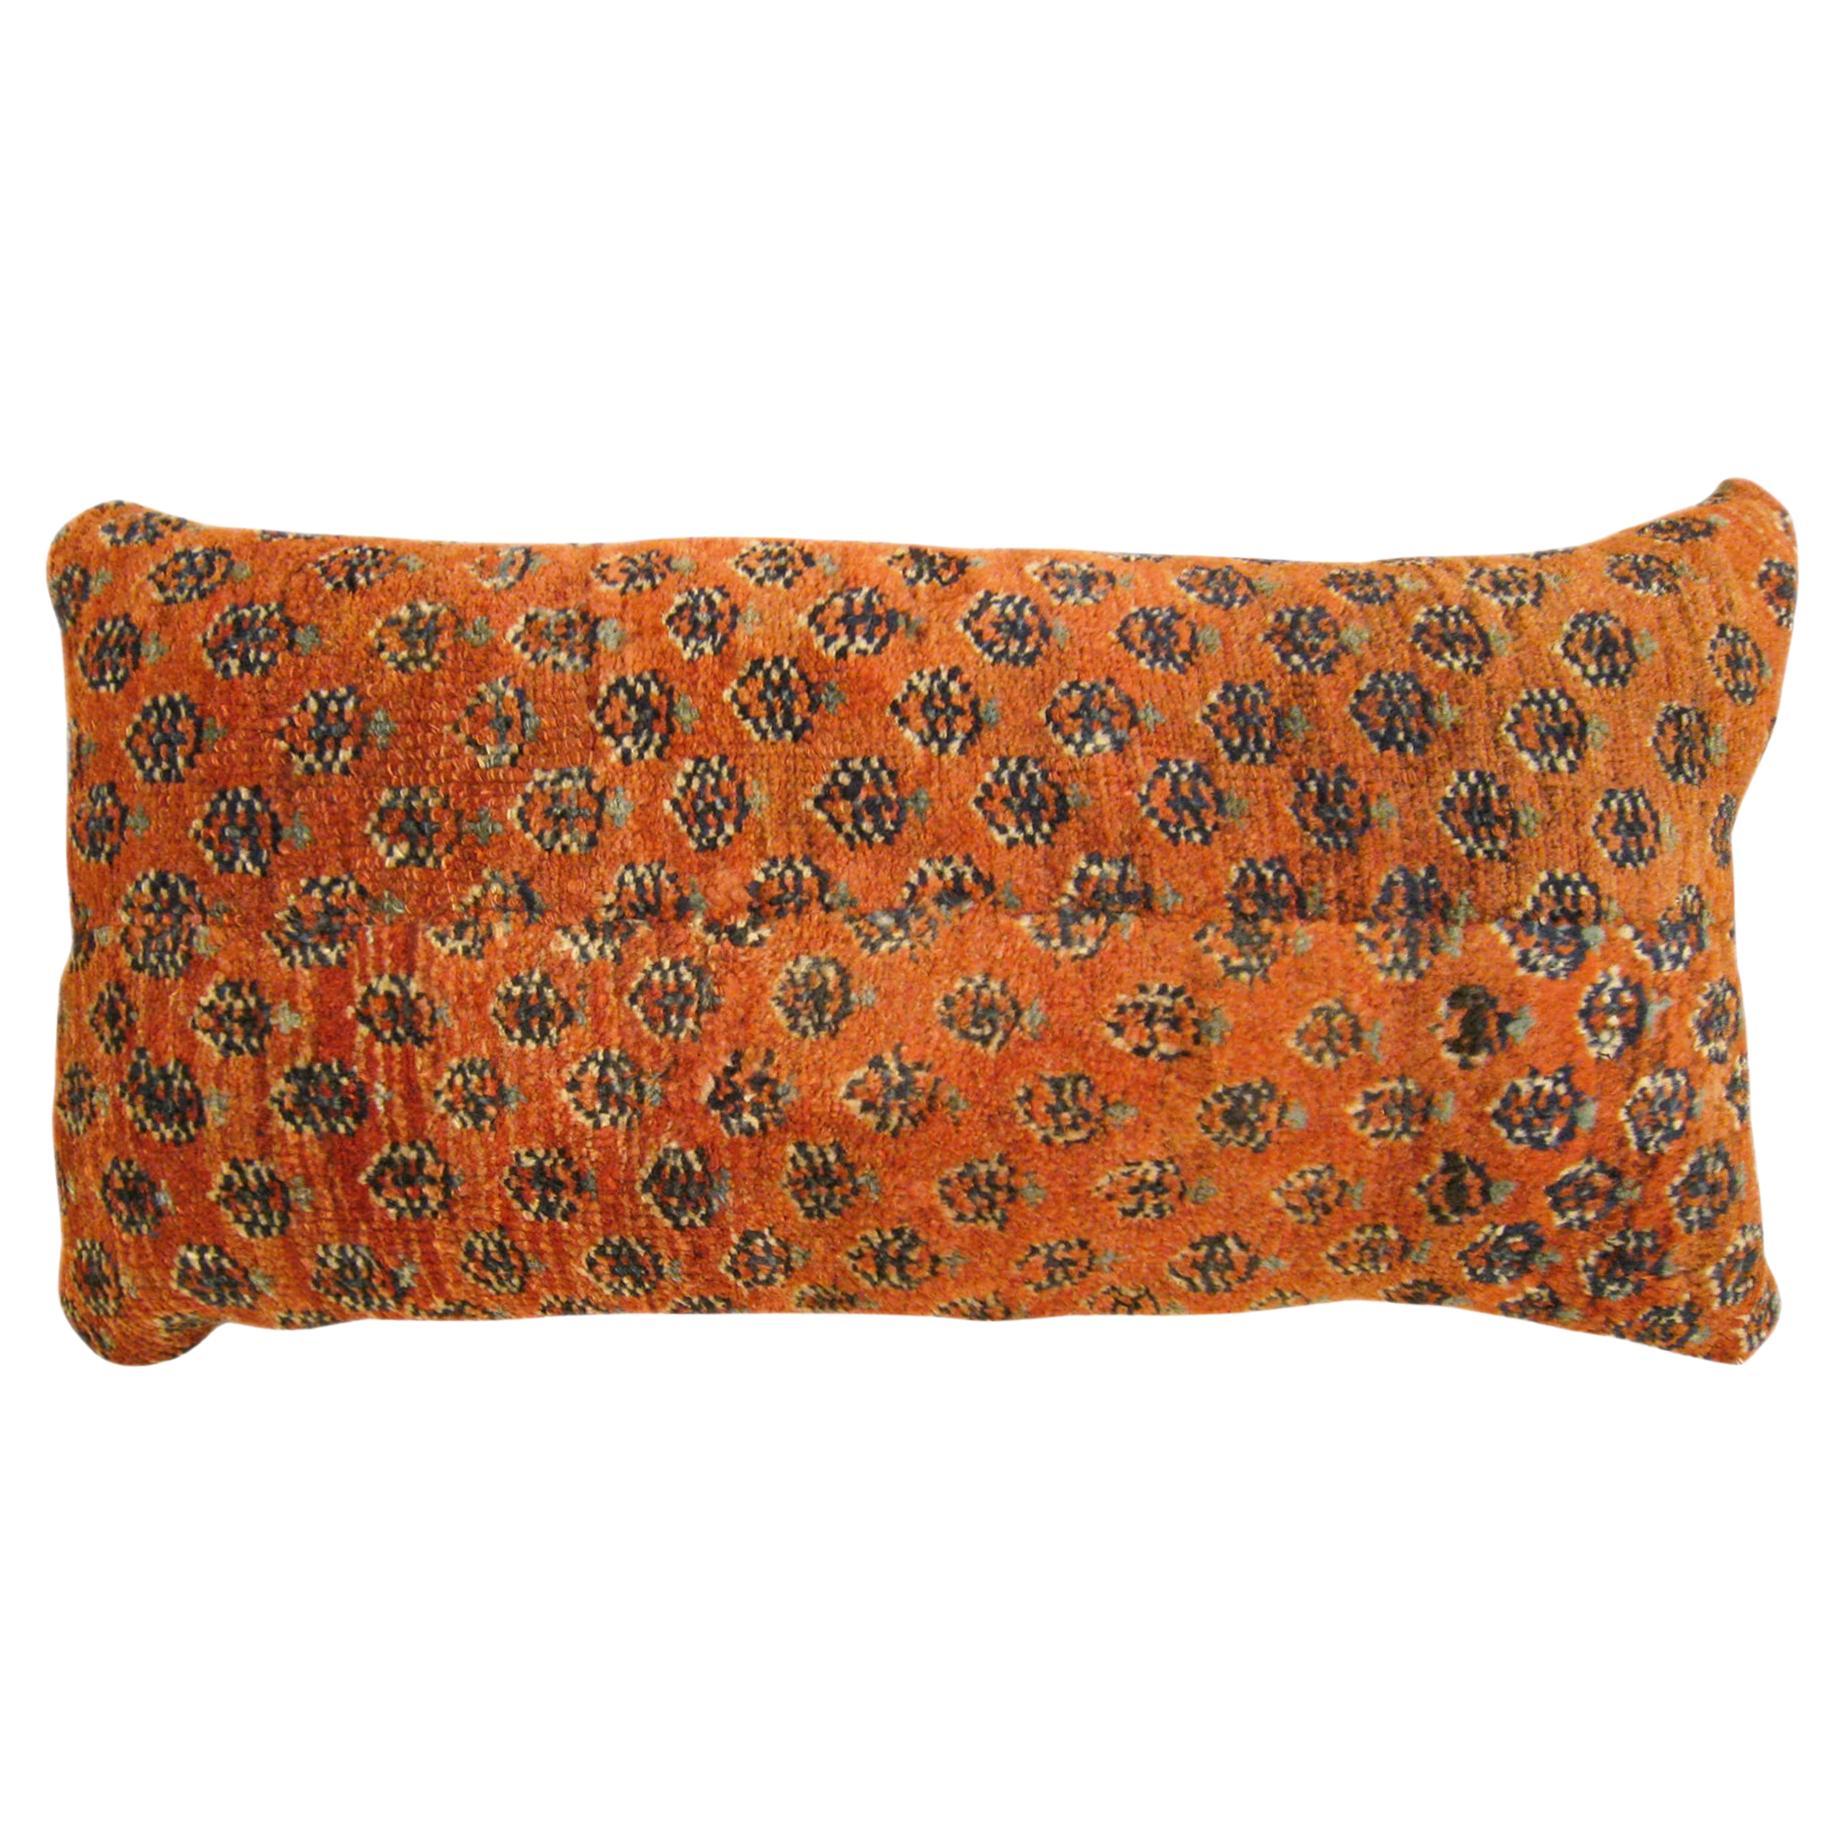 Decorative Antique Persian Saraband Carpet Pillow with Floral Elements For Sale